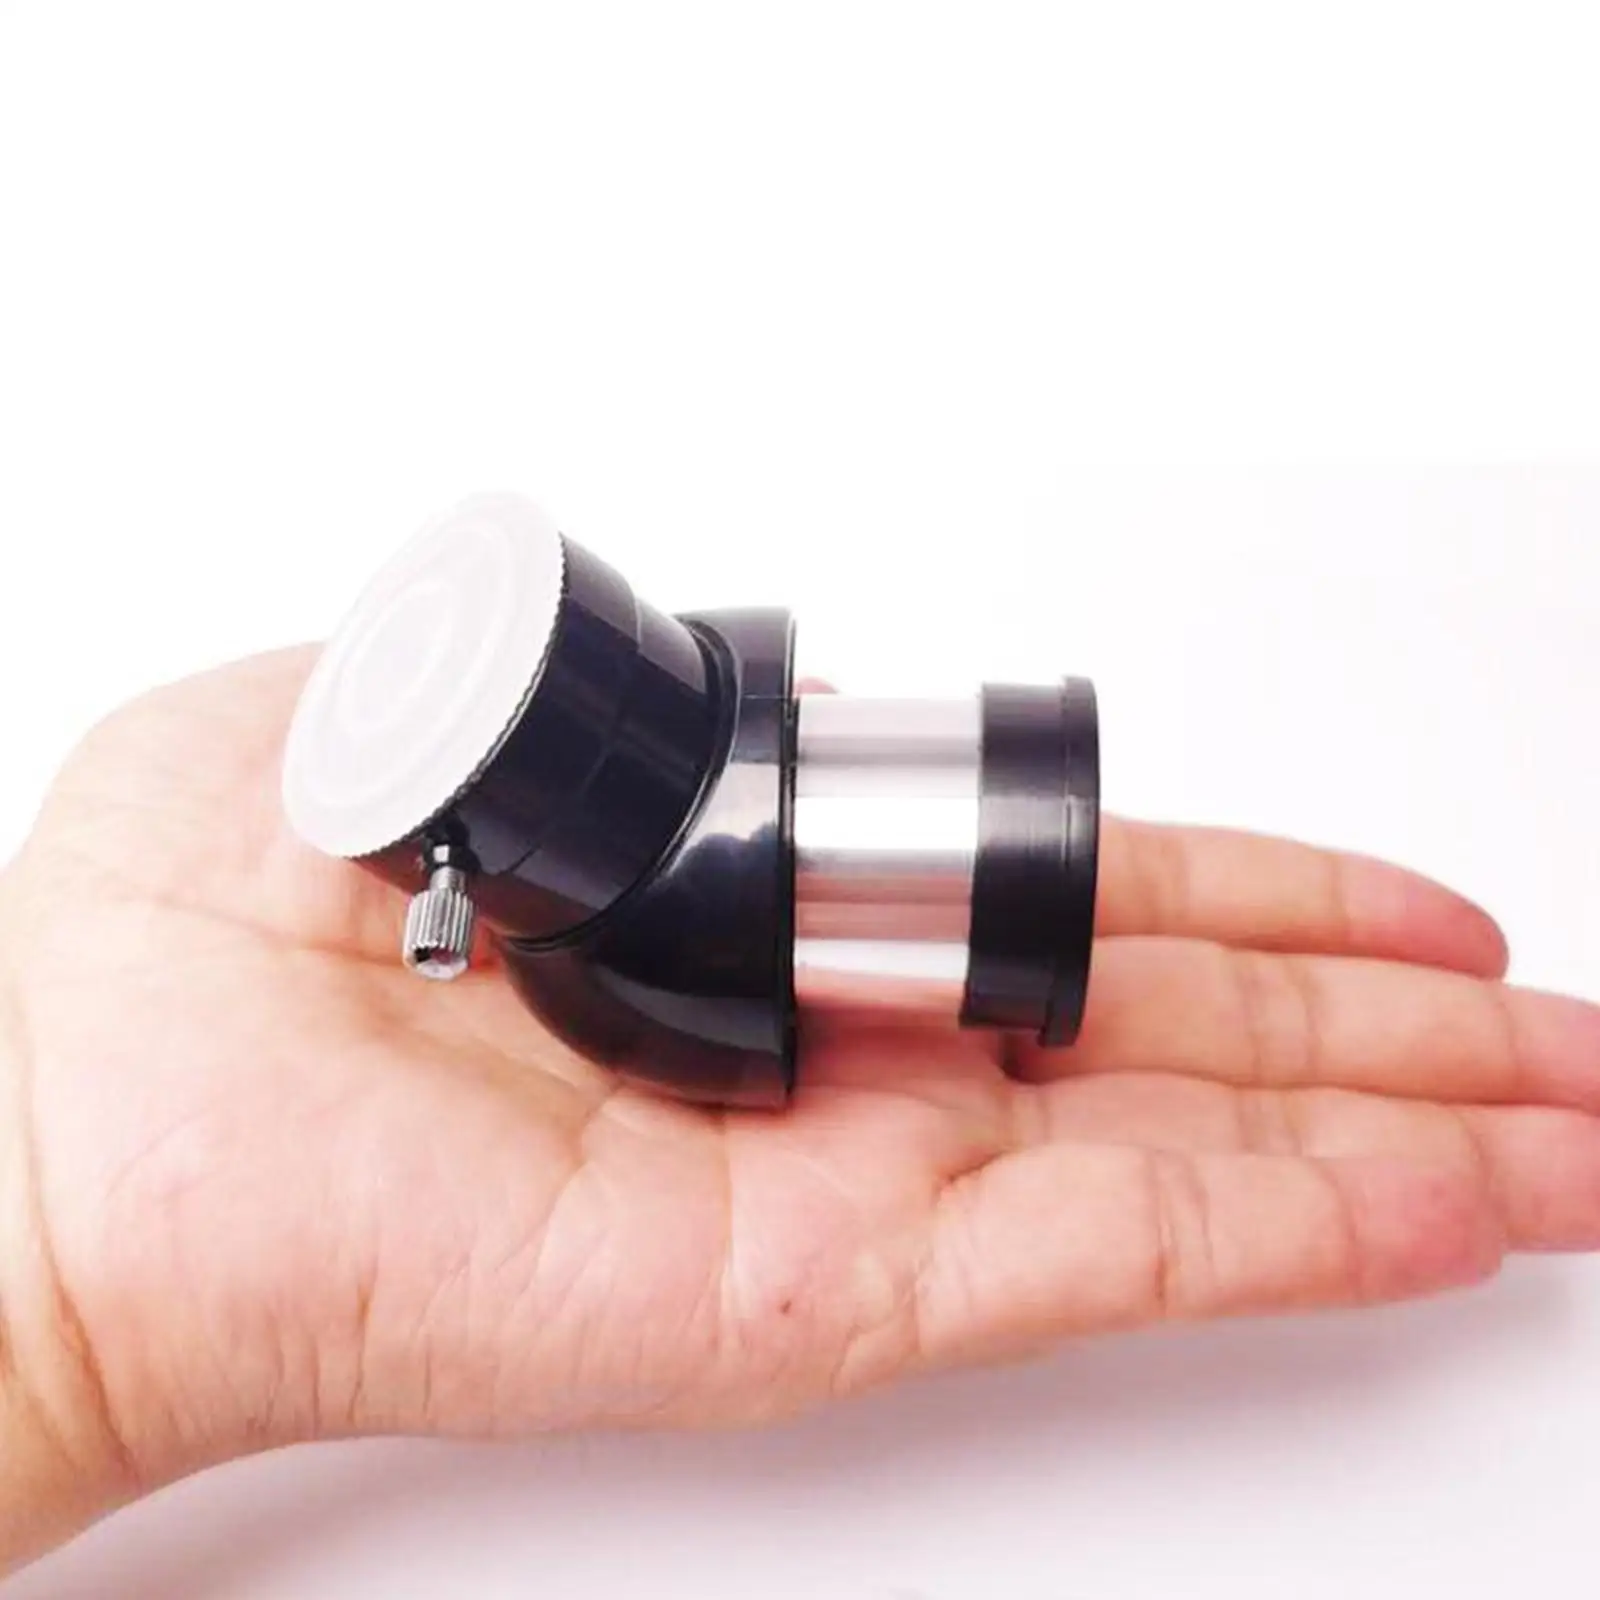 31.7mm 45 Degree Erecting for Telescope Eyepiece w/ Dust Cover Black